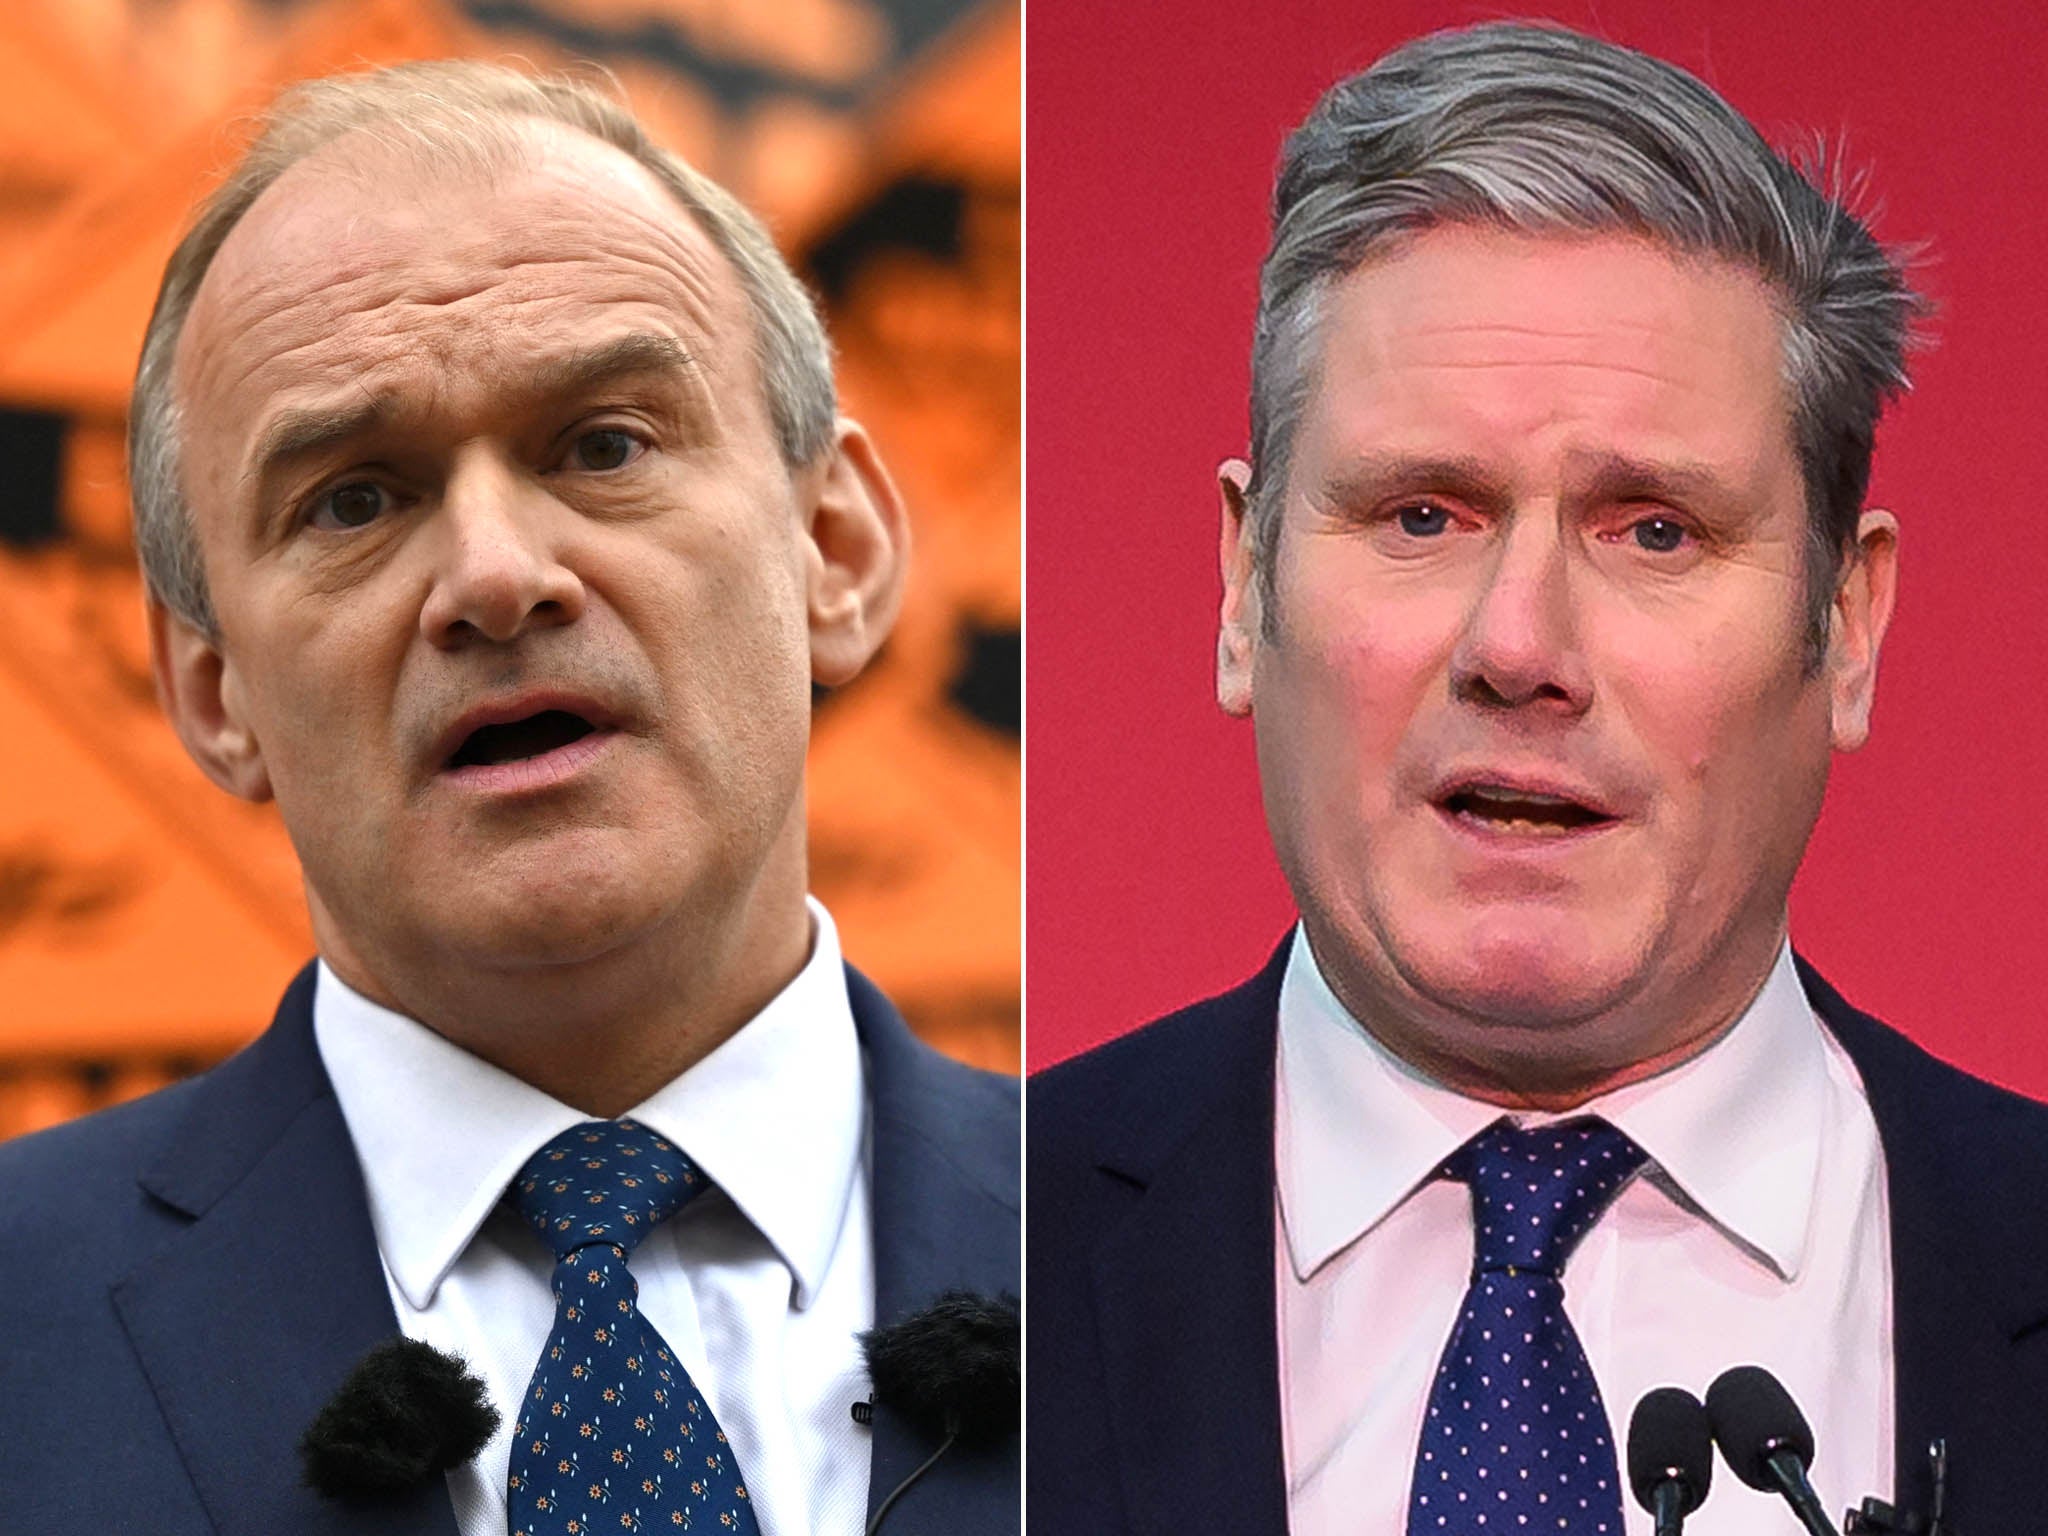 Ed Davey and Keir Starmer have denied working together informally